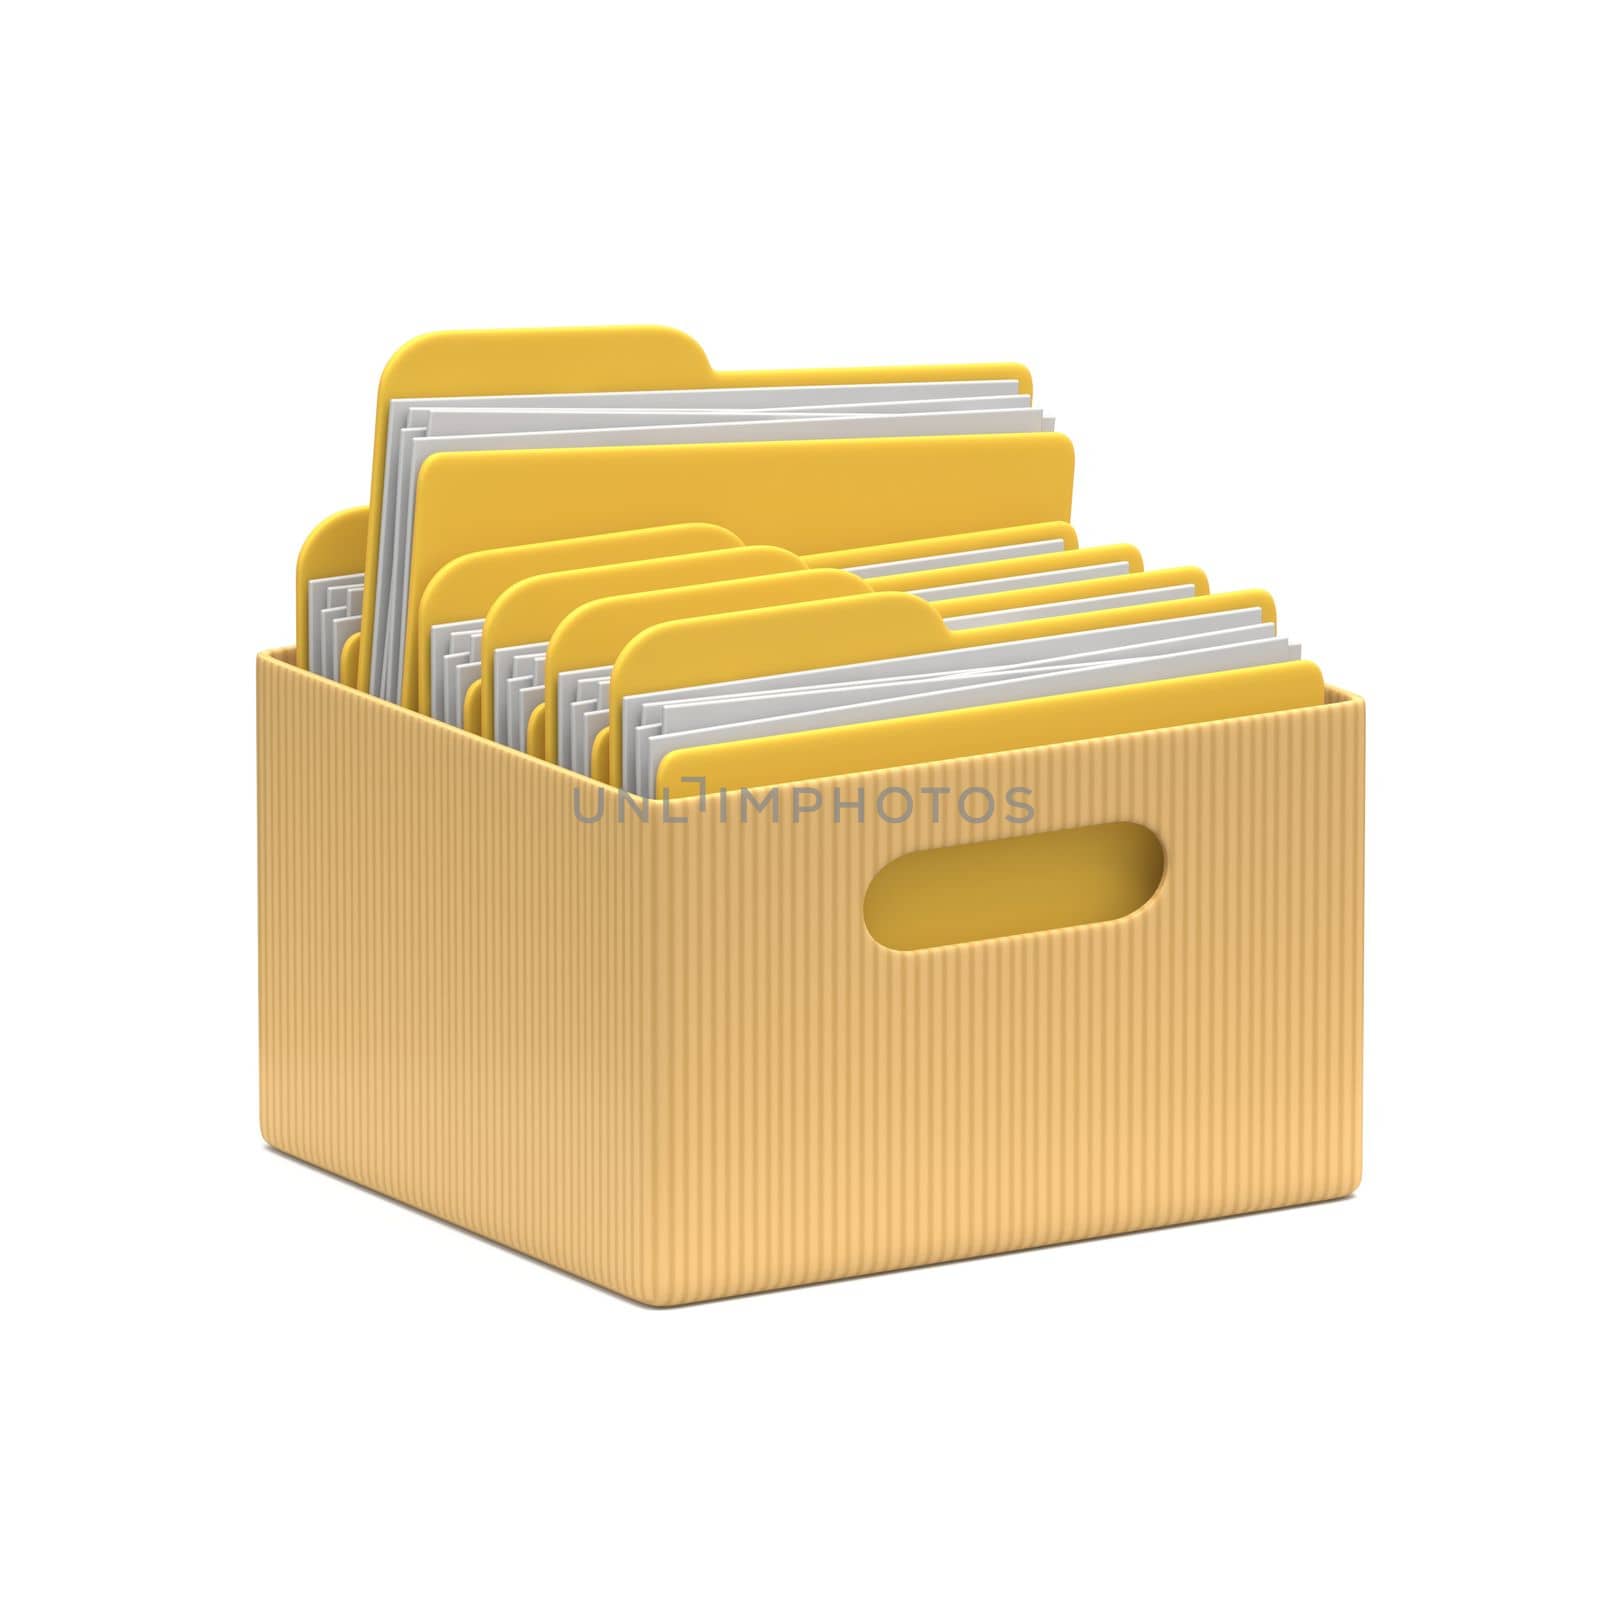 Cardboard box with yellow folders 3D rendering illustration isolated on white background